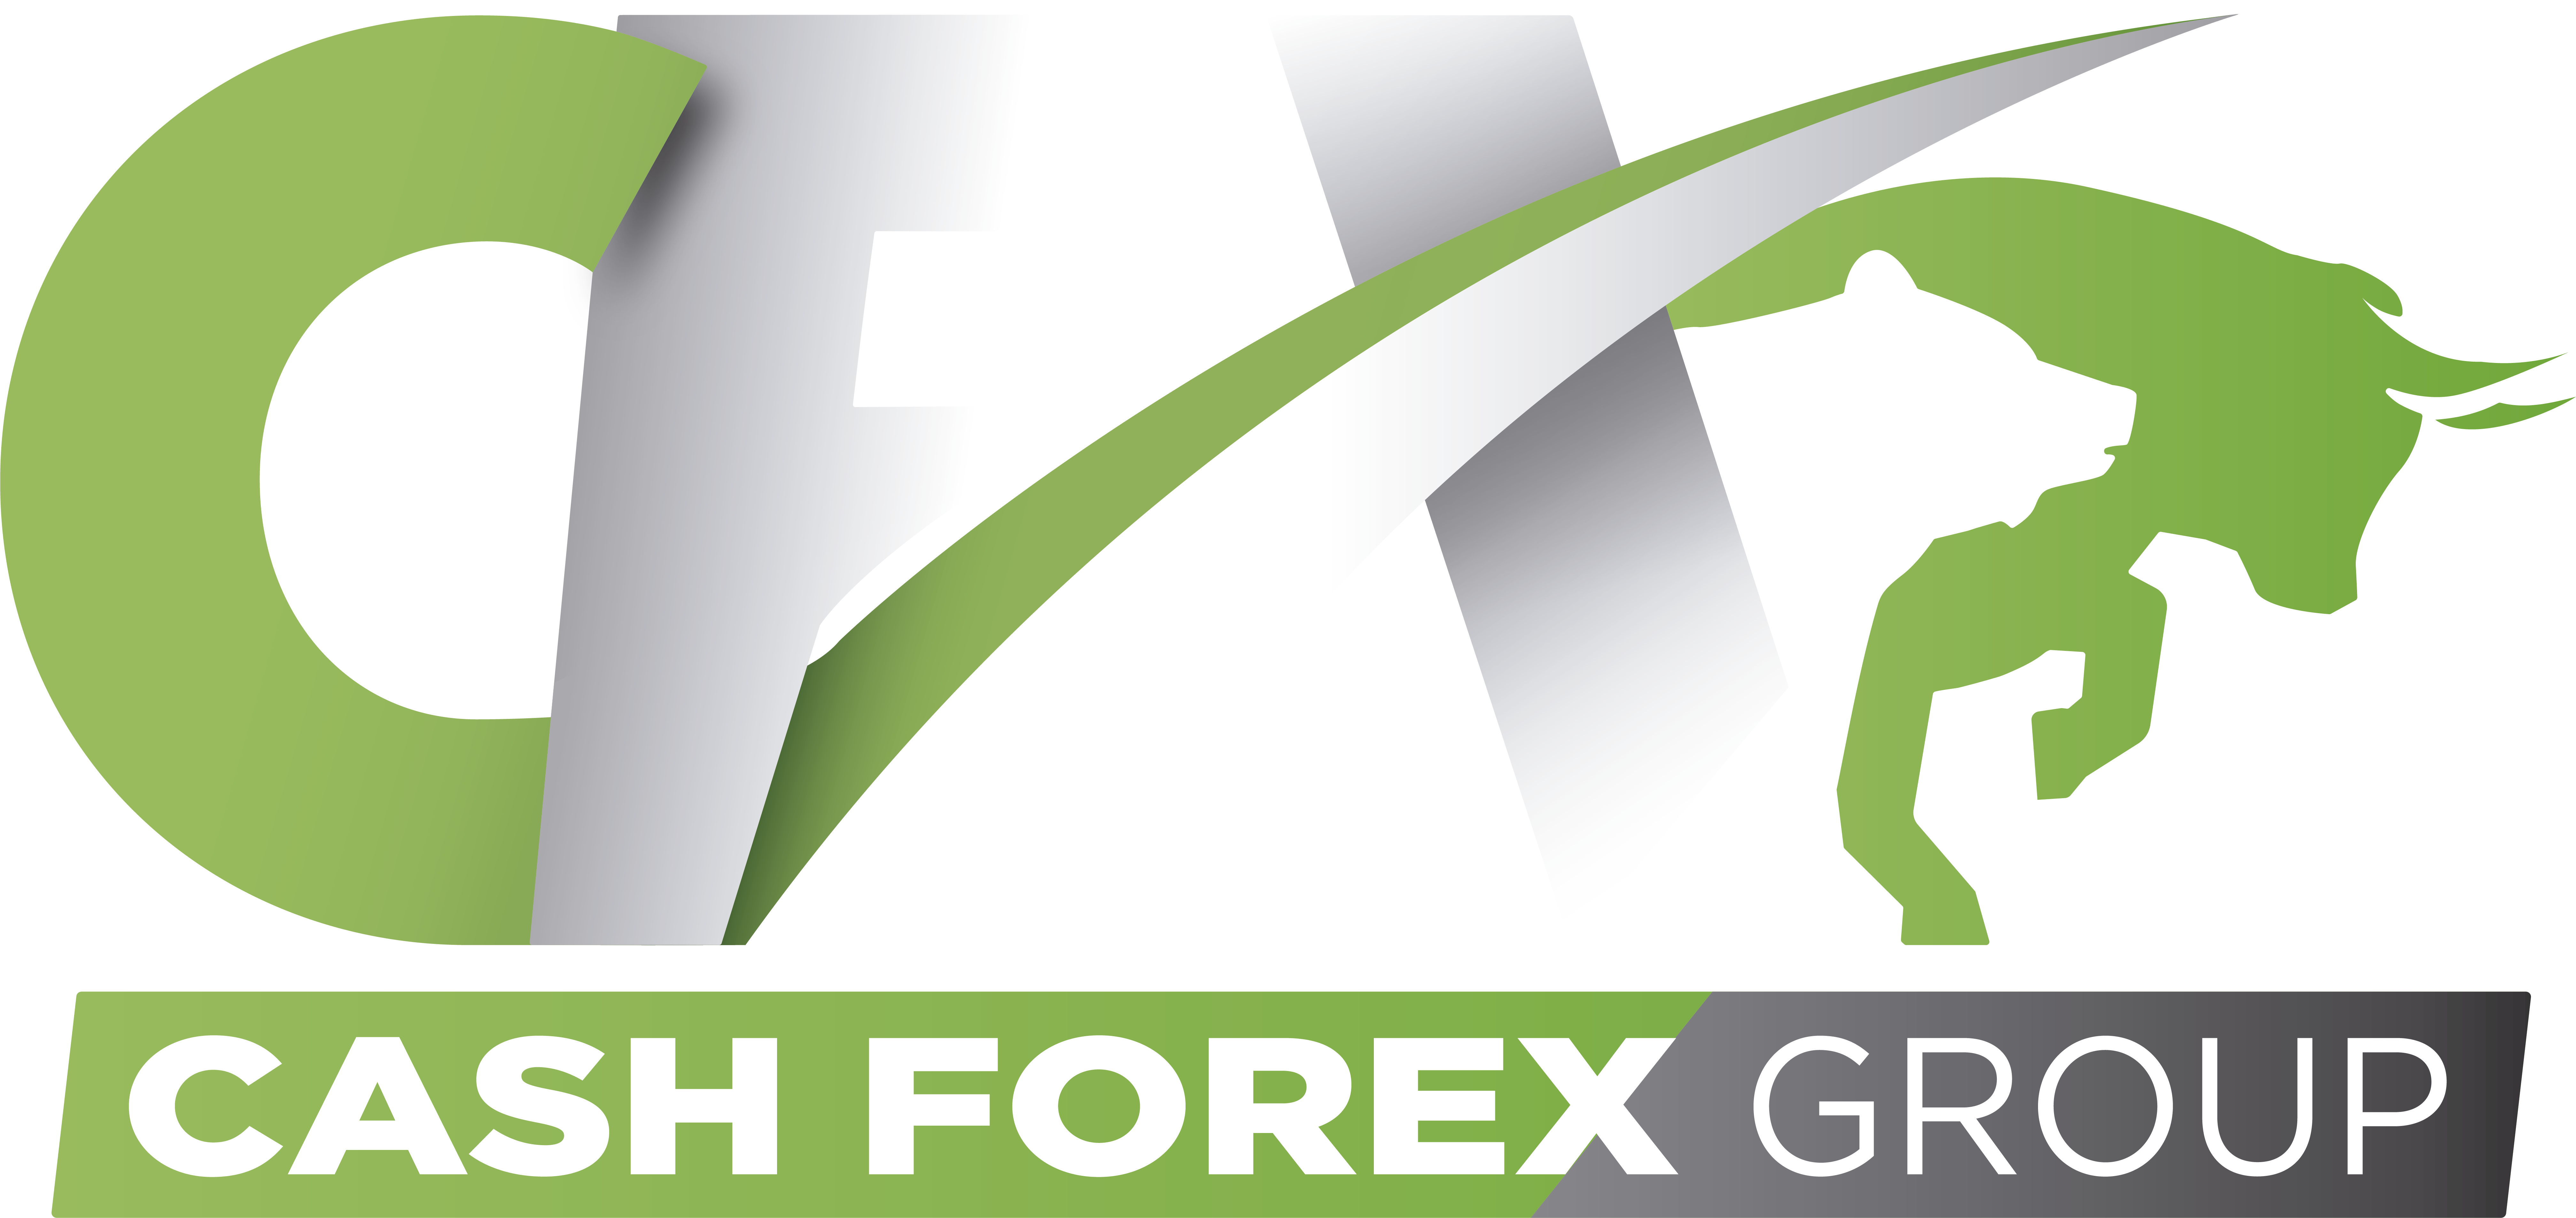 Cash Forex Group (CashFX) Passive Crypto/Forex Trading